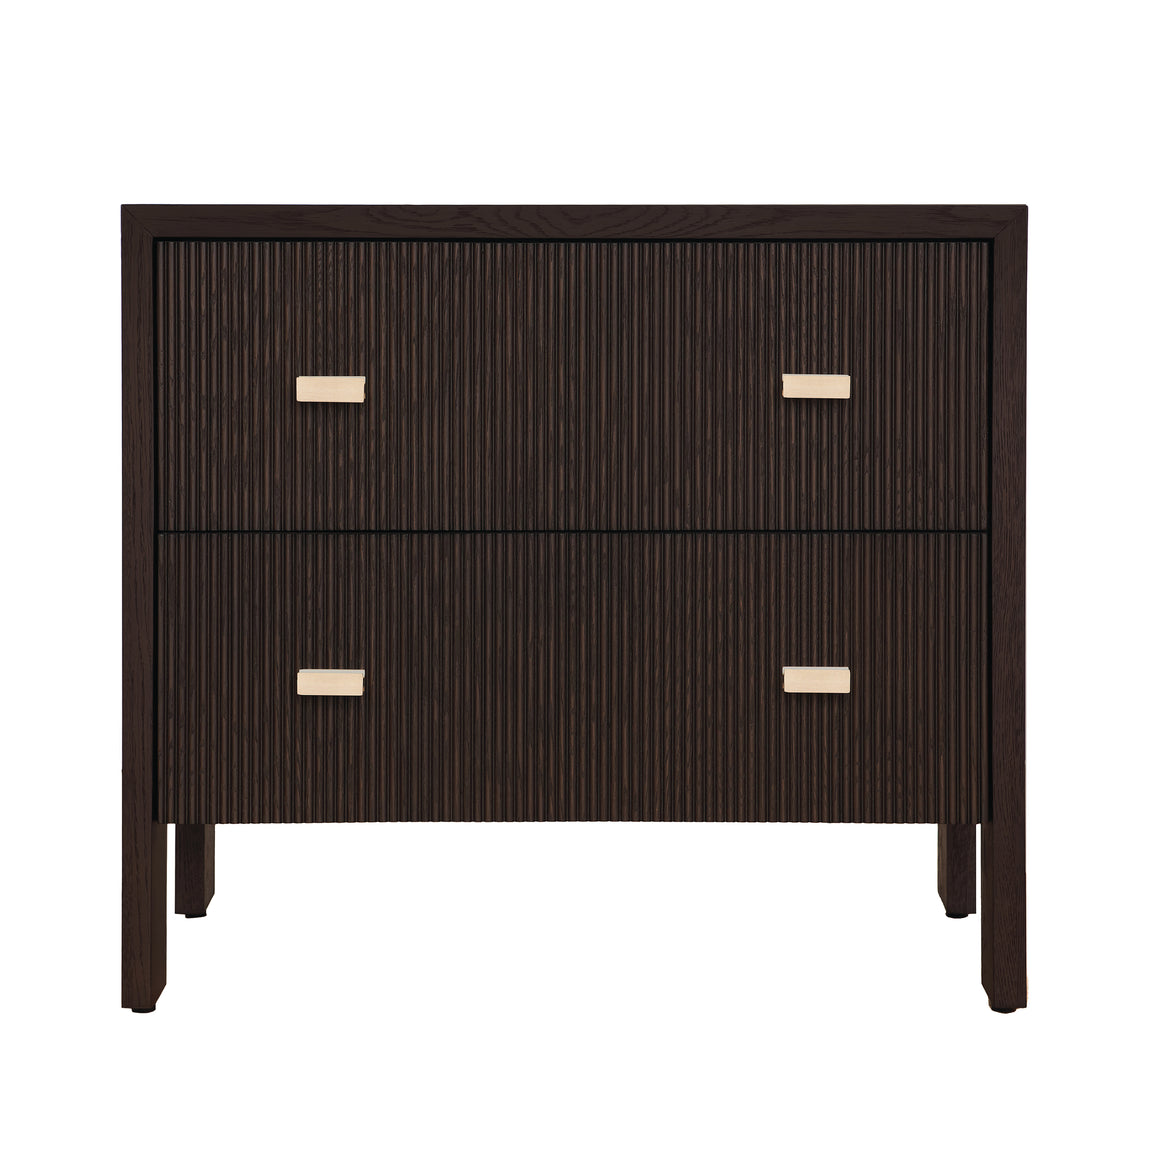 Two Drawer Side Table with Fluted Detail in Dark Espresso Oak